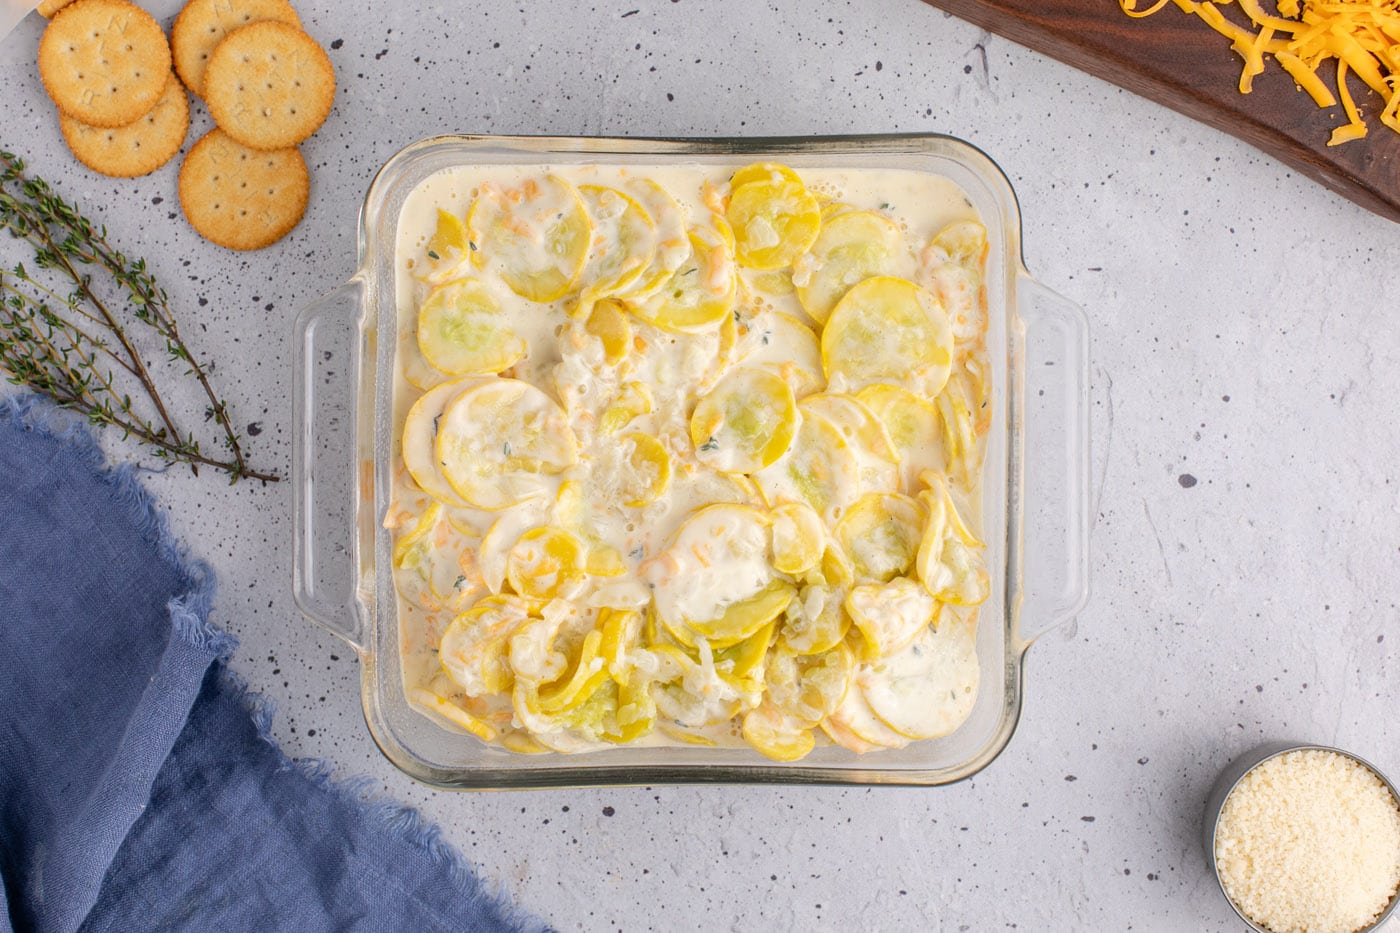 yellow squash with filling in a baking dish